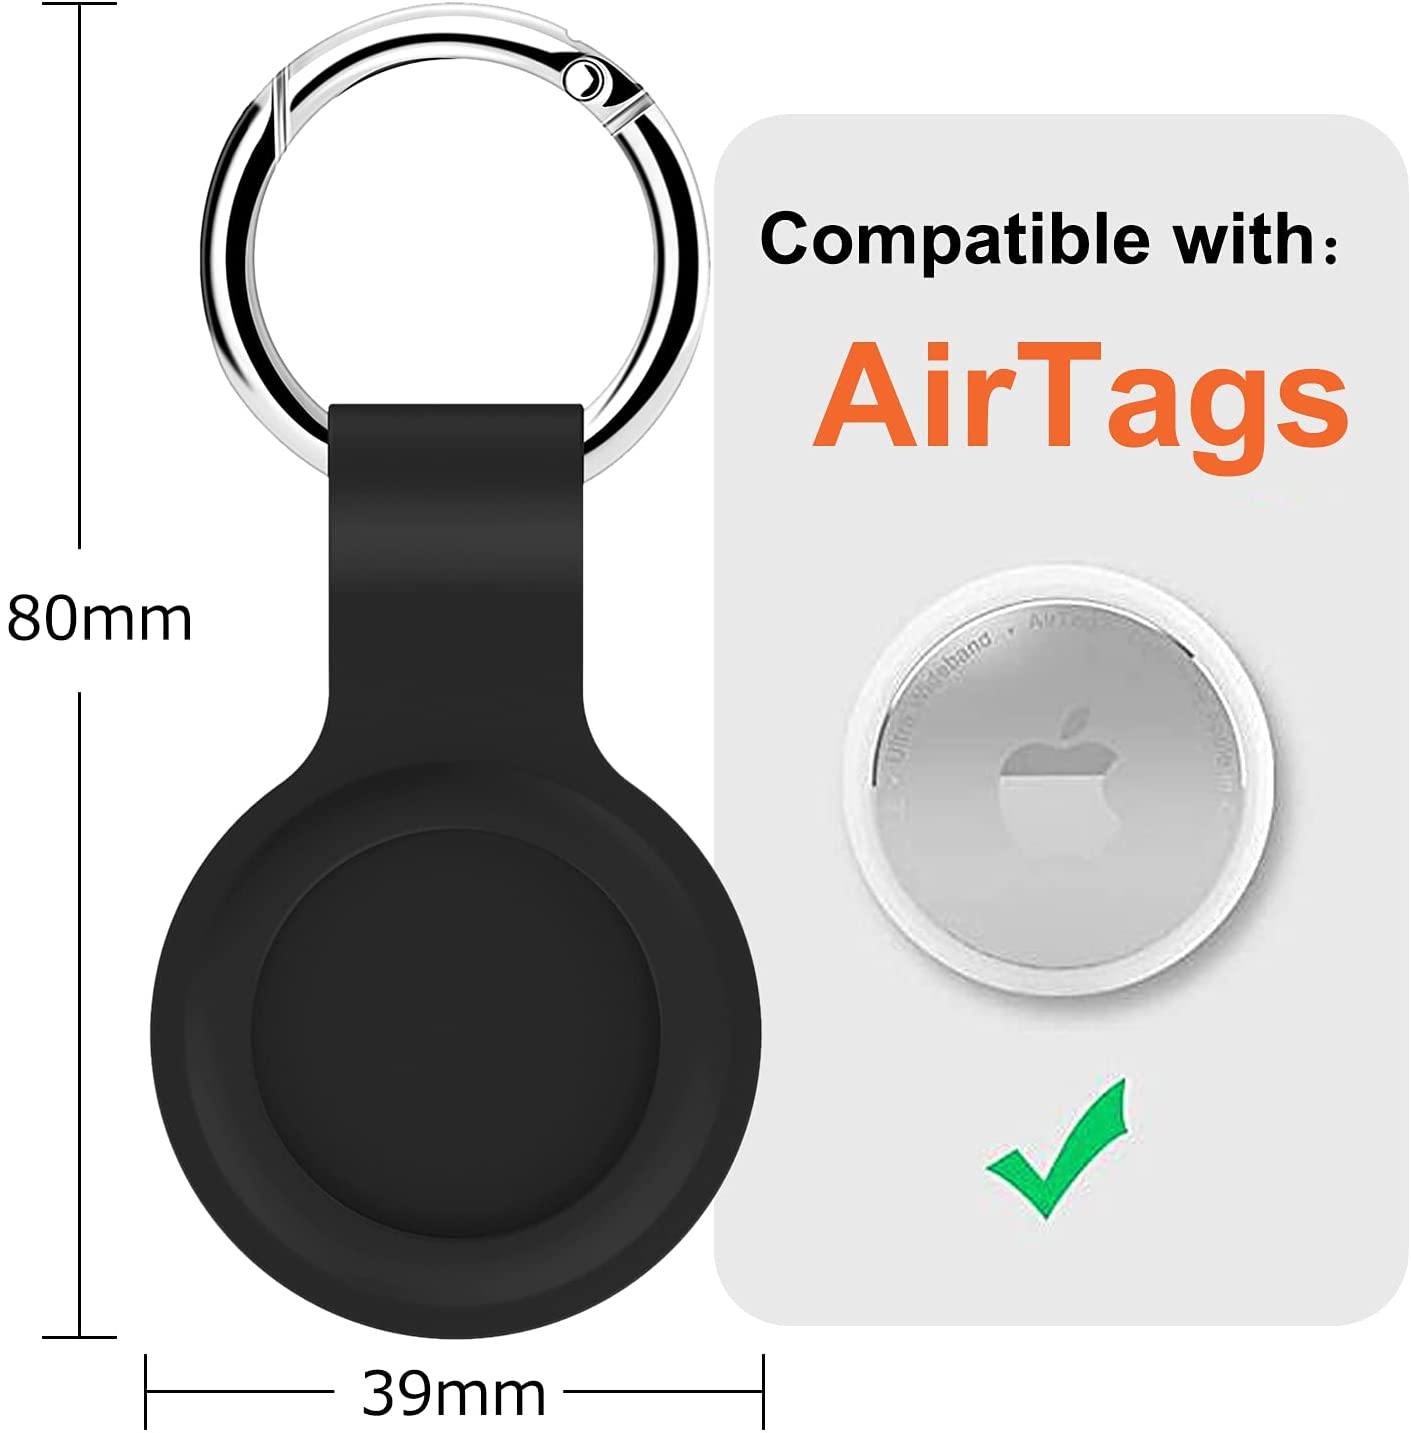 Protective Case for AirTags Location Tracker Protector - Silipac